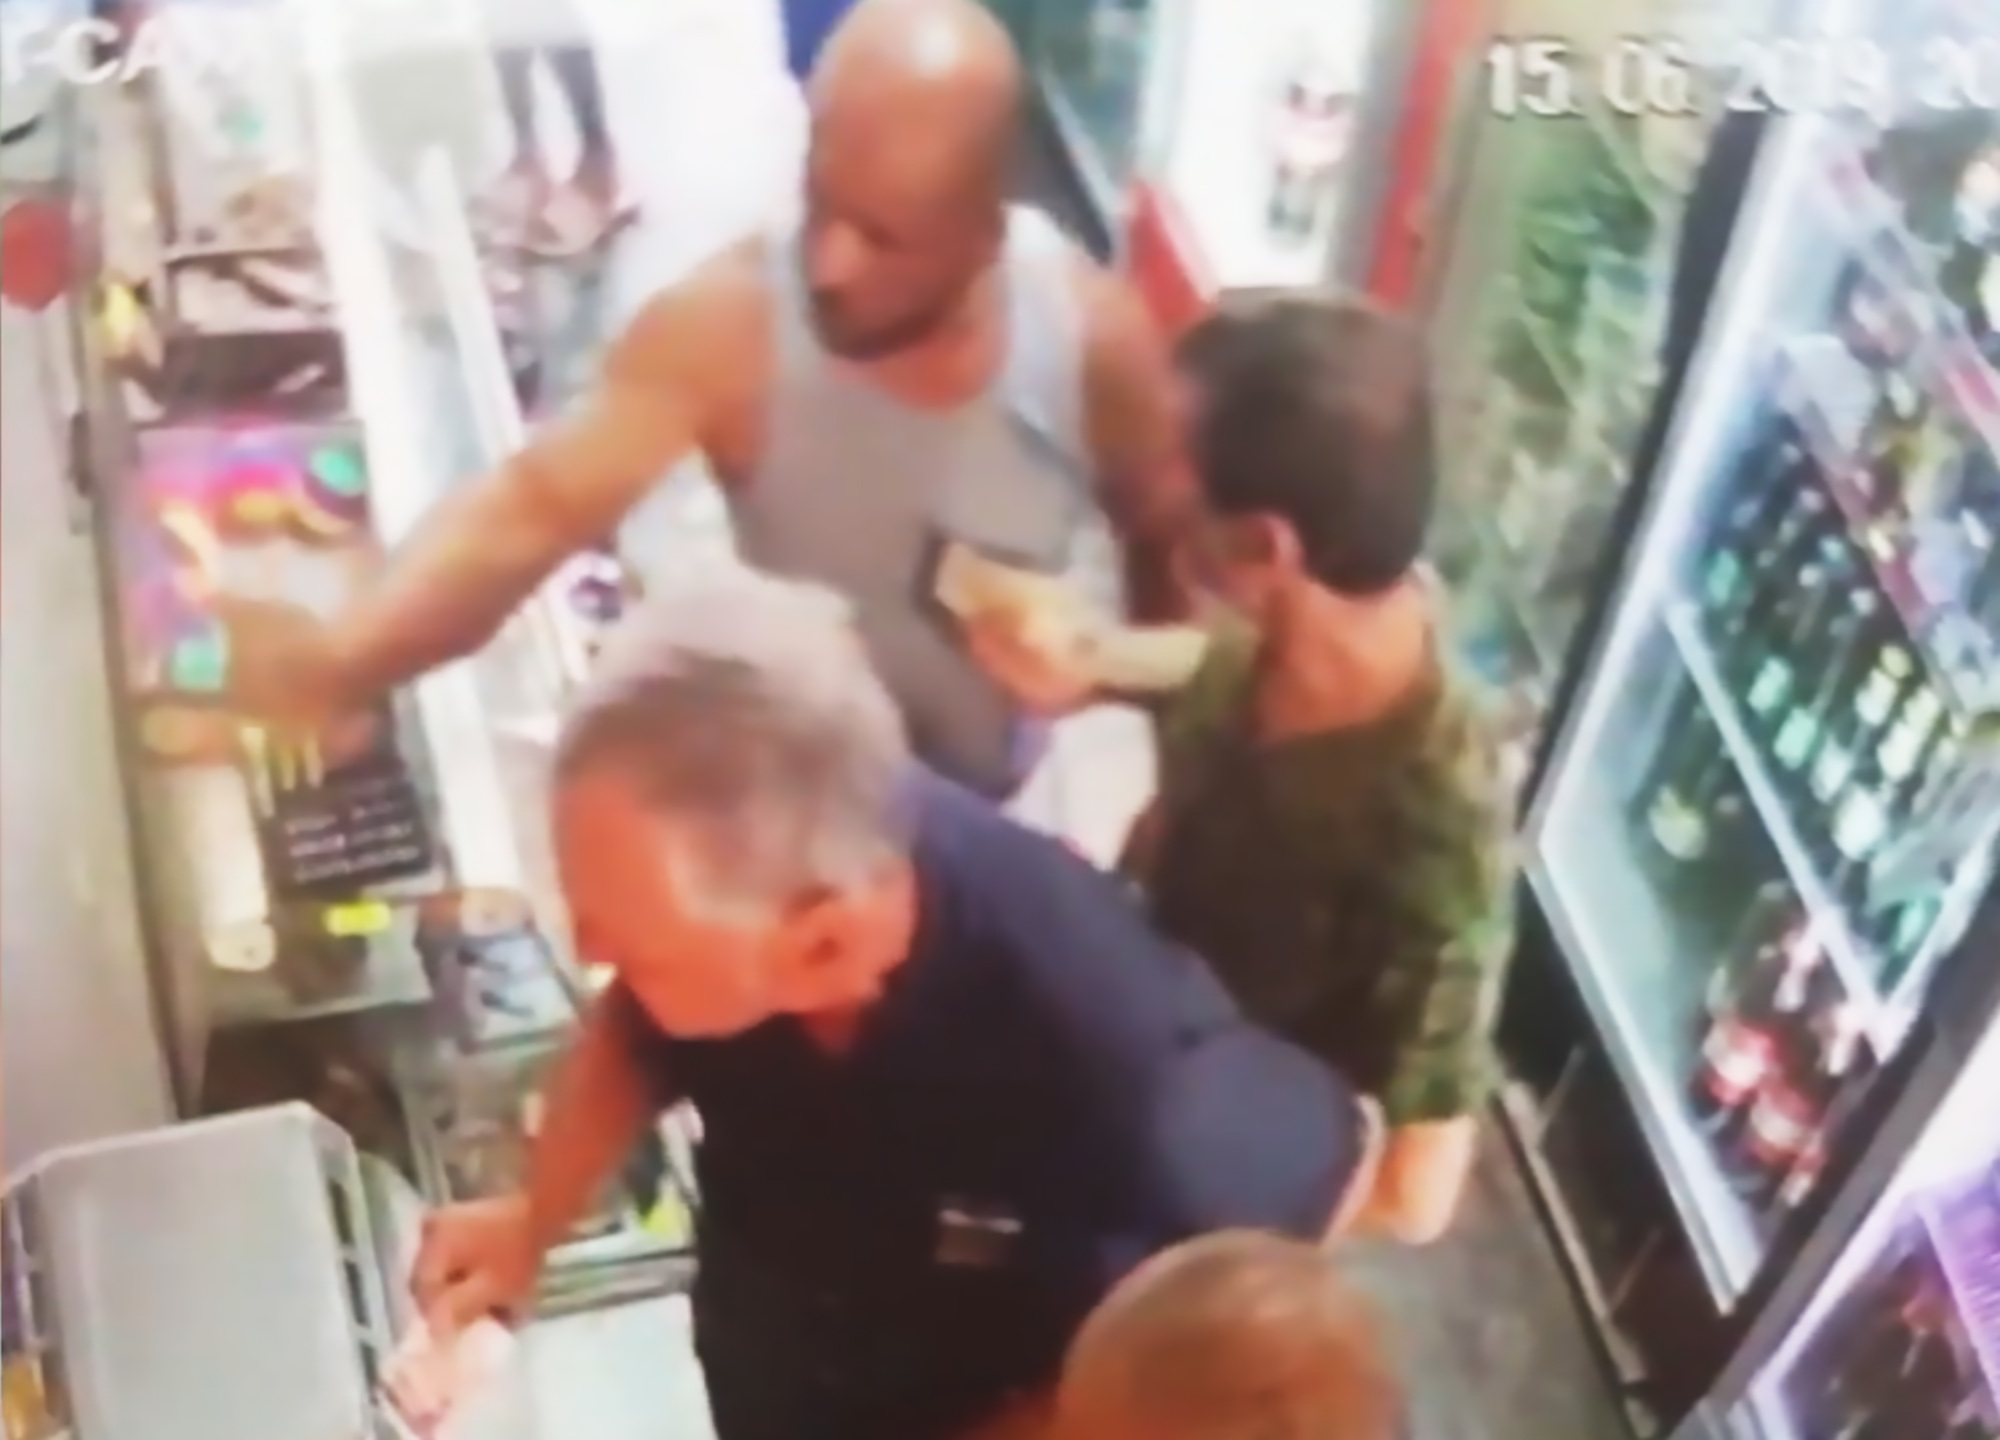 Read more about the article Brothers Pummel Man In Shop During Row Over Free Beer